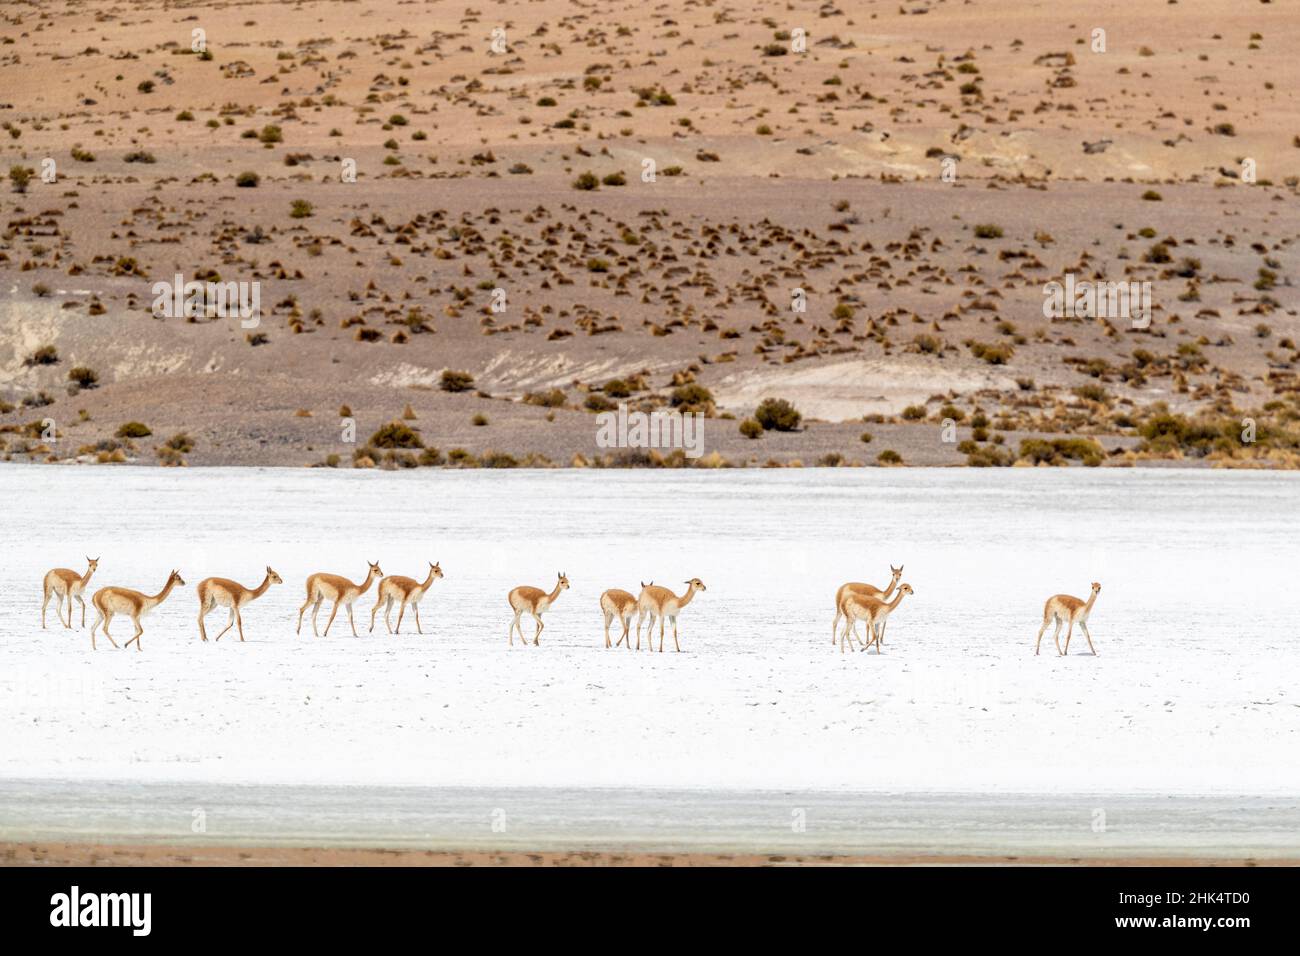 A herd of vicunas (Lama vicugna) in the altiplano of the high Andes Mountains, Bolivia, South America Stock Photo